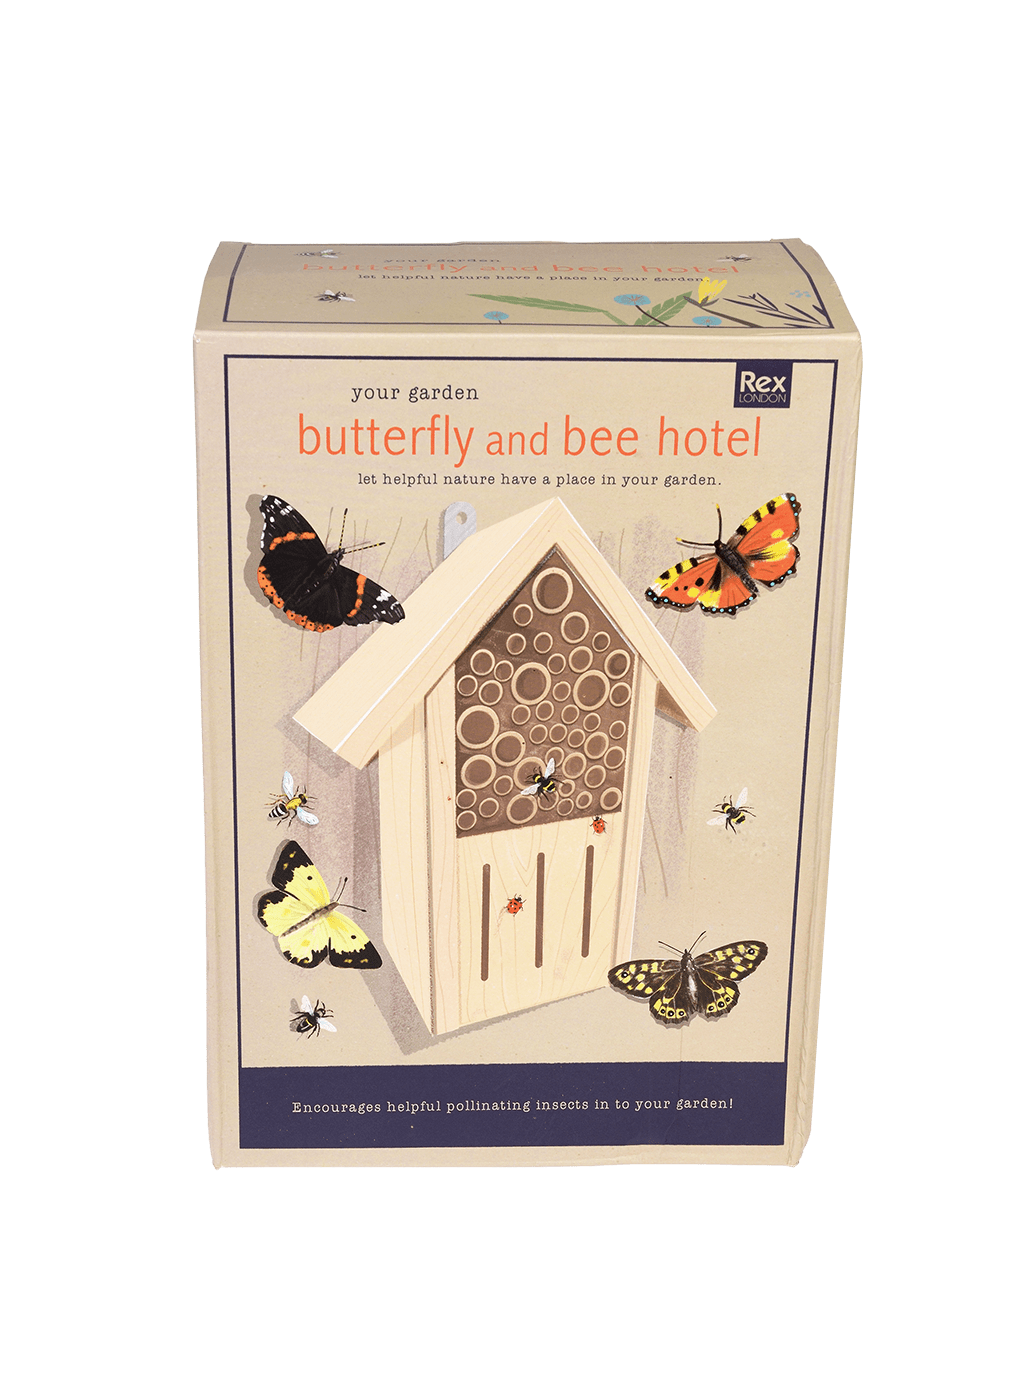 A house for bees and butterflies